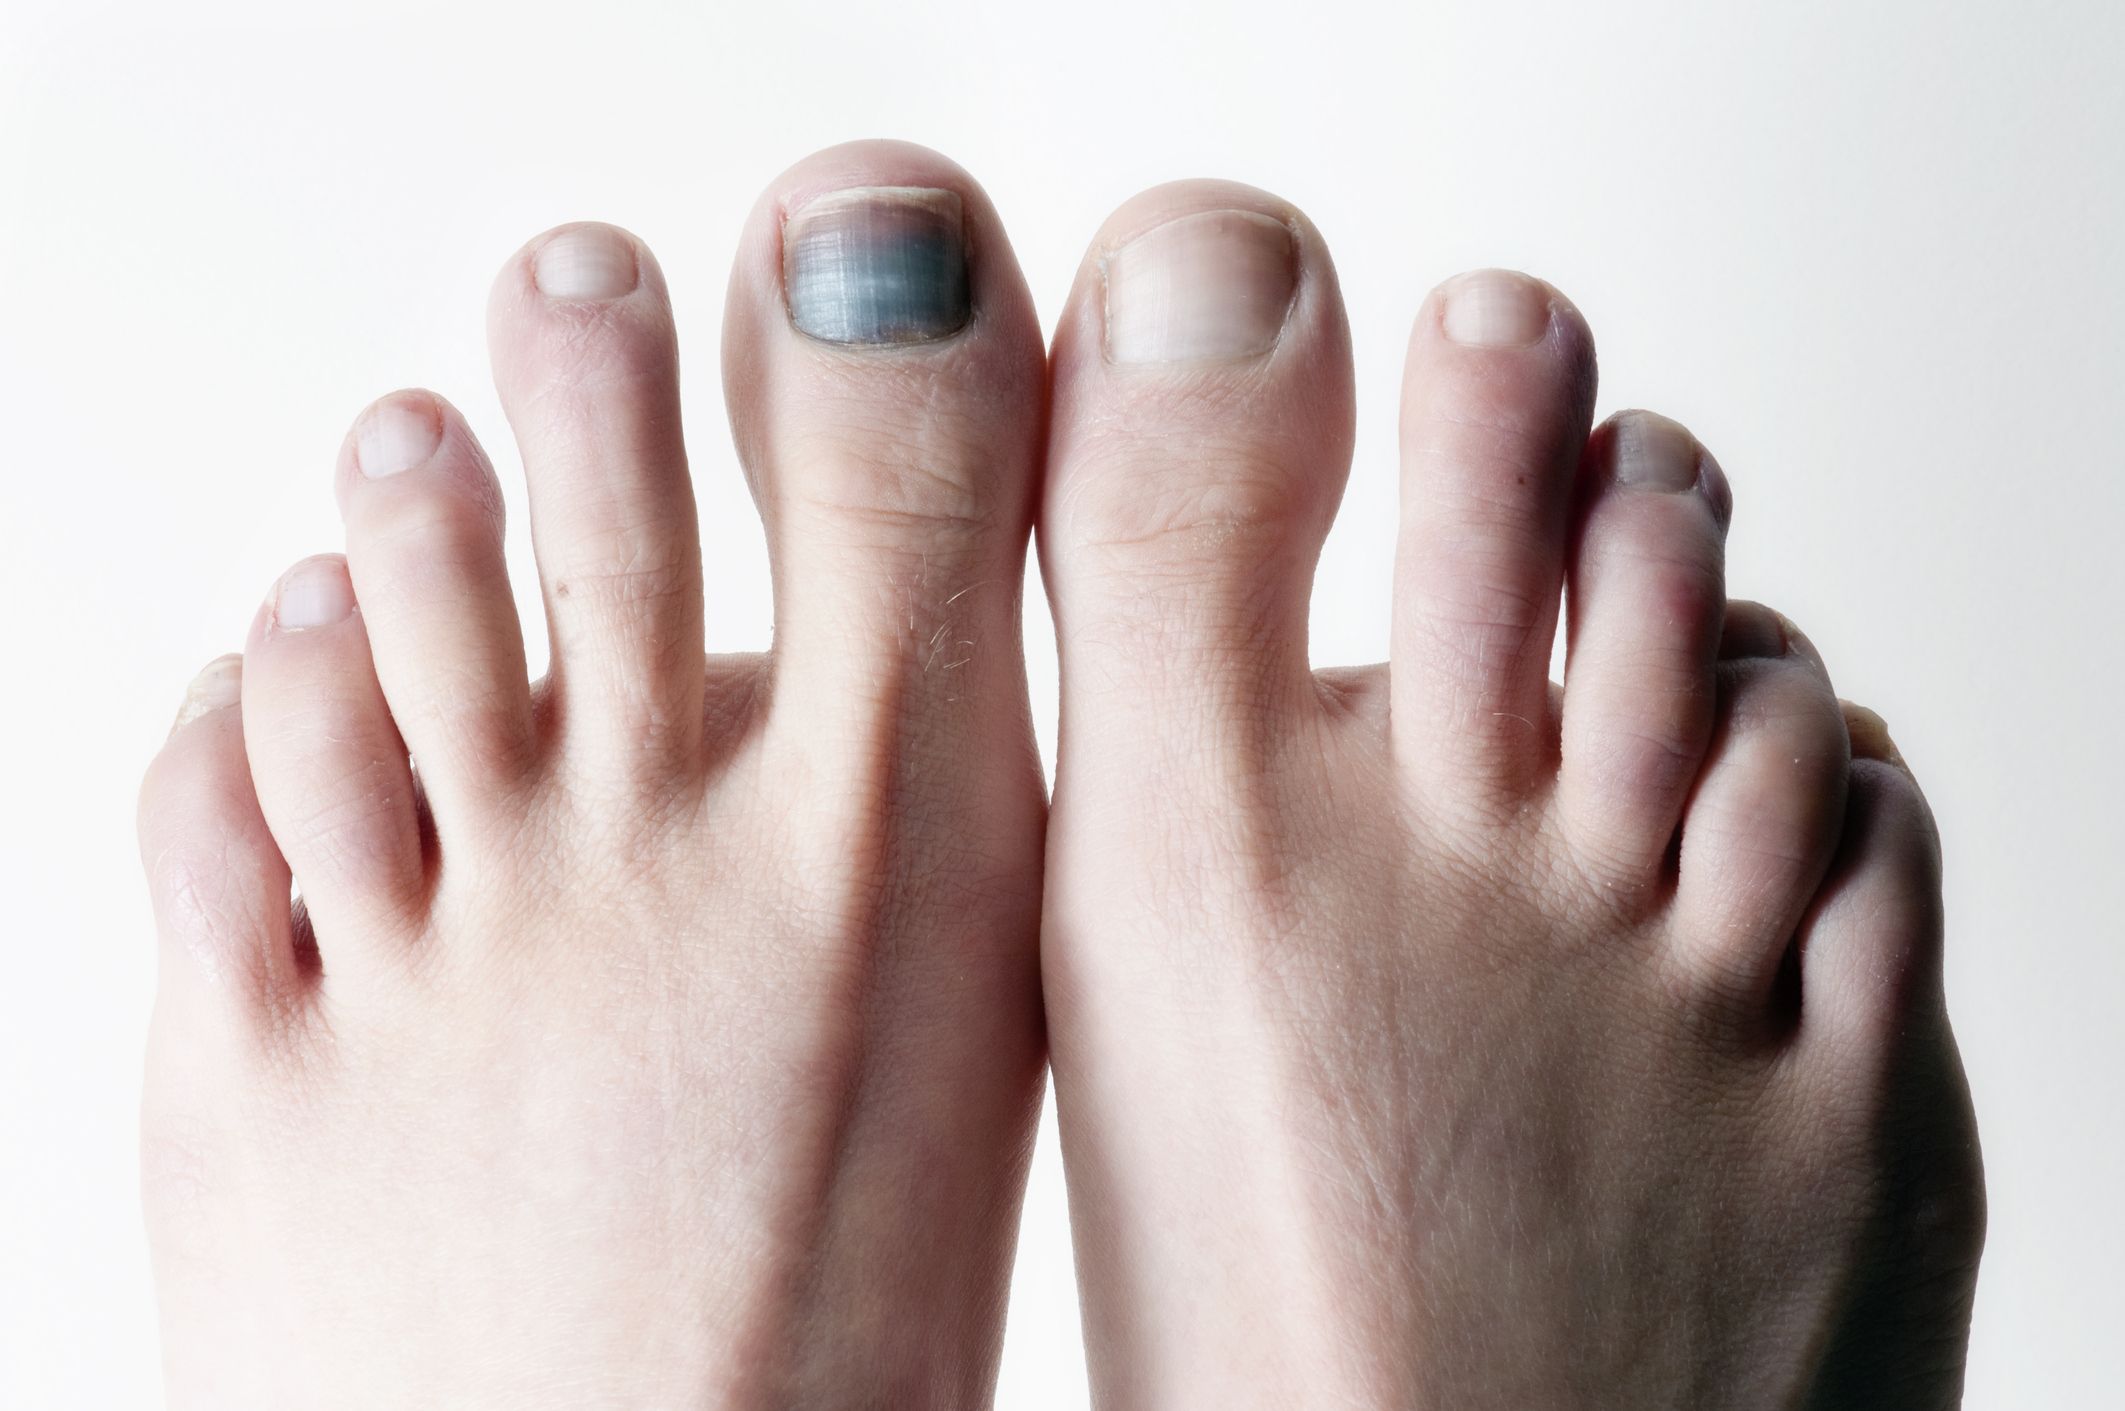 How to Safely Remove a Damaged Toenail